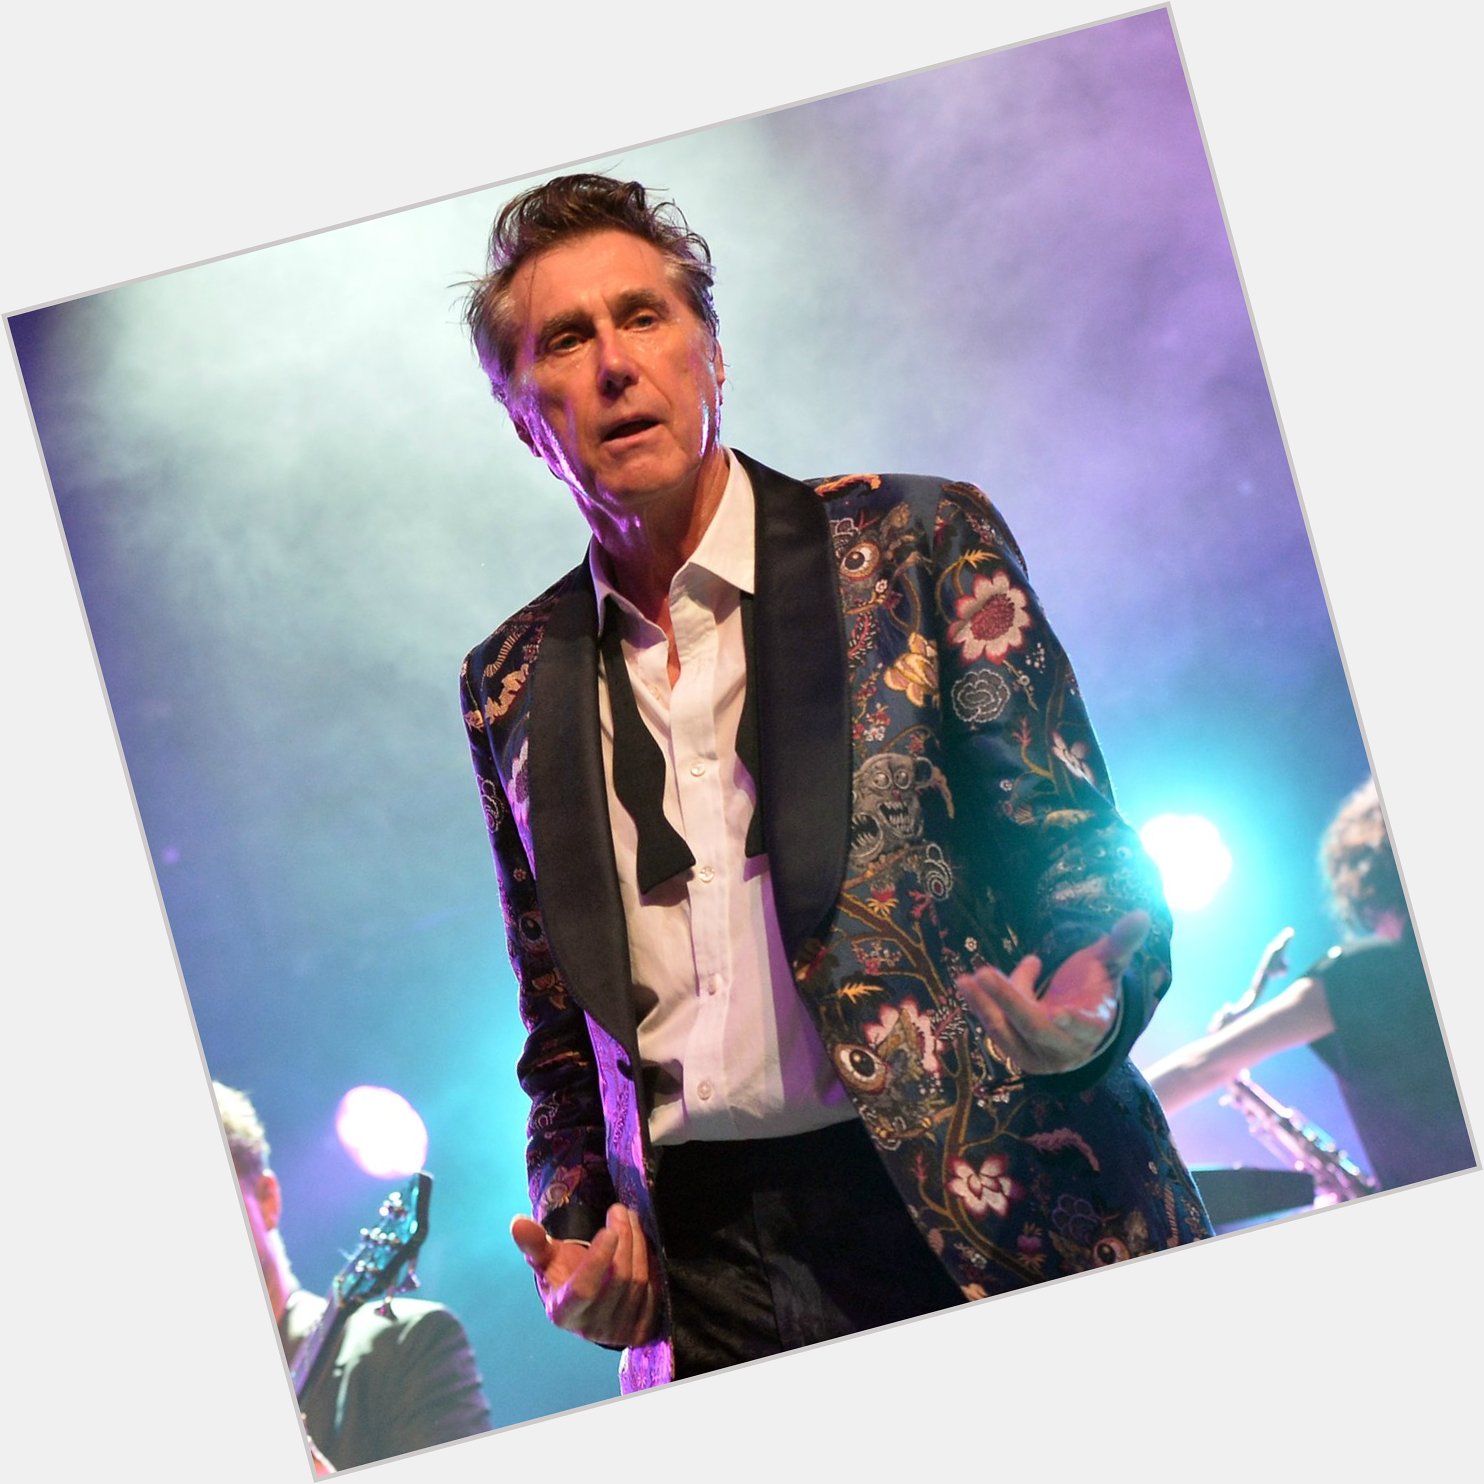 A very Happy Birthday to Bryan Ferry! Make sure you don t stop the dance! 